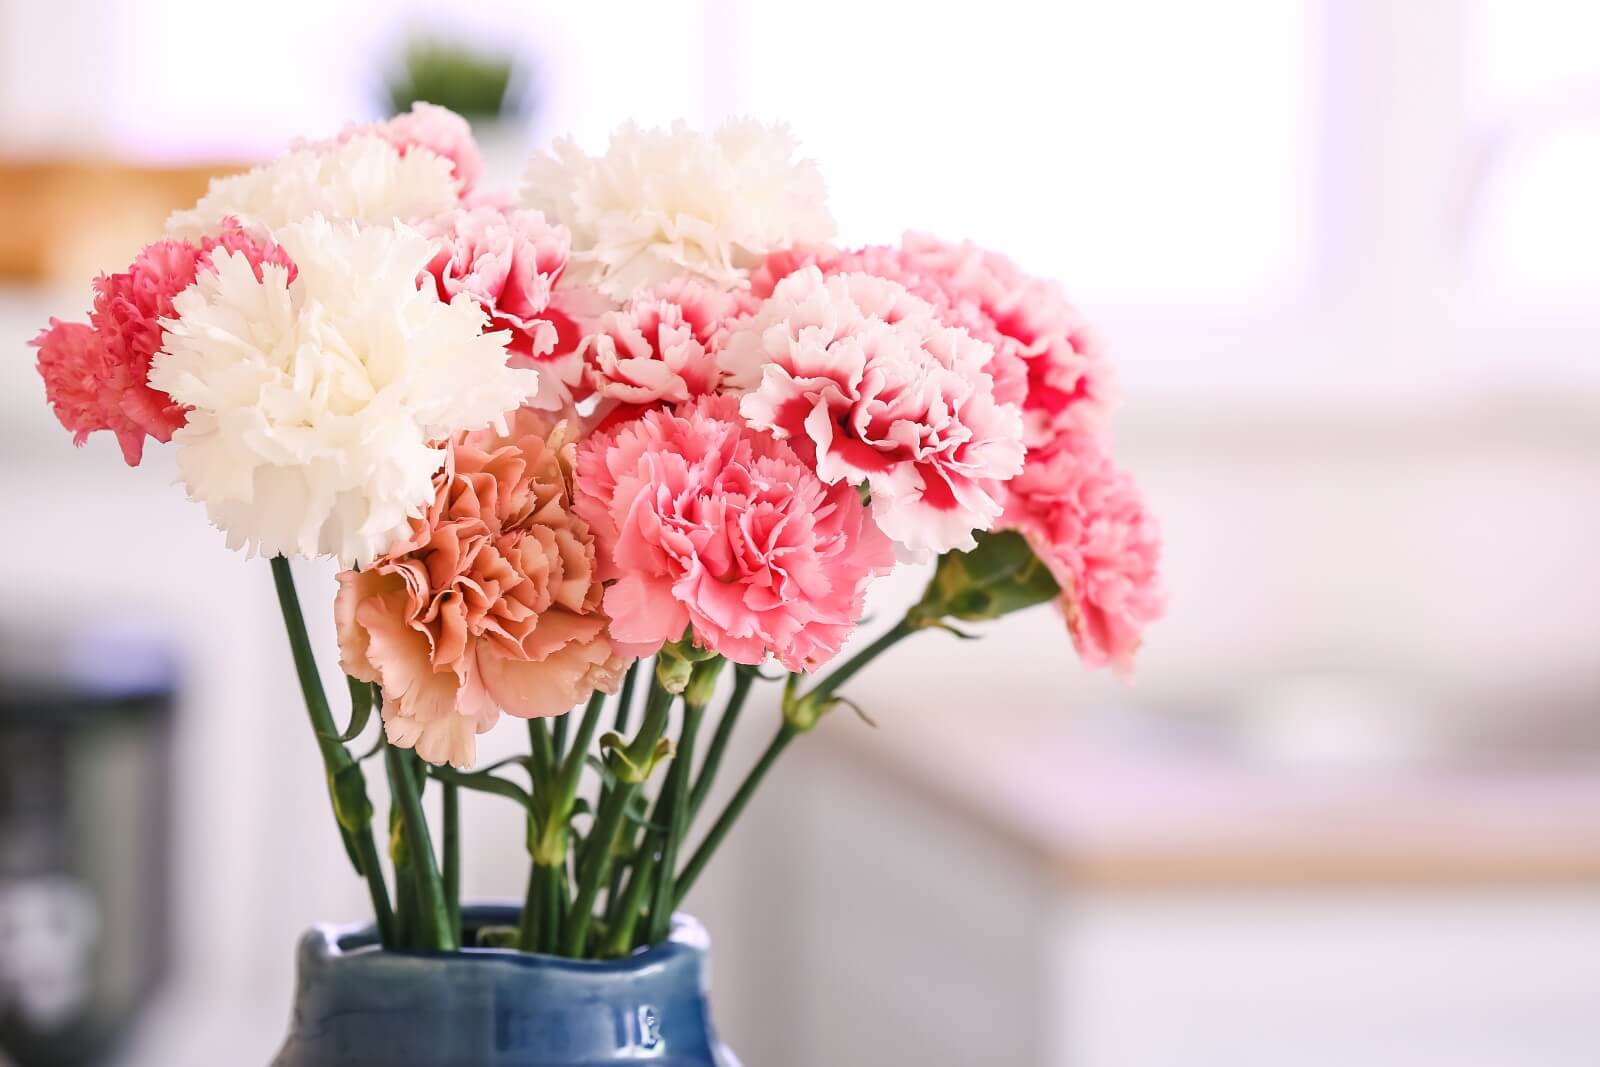 How To Care For Carnations In A Vase